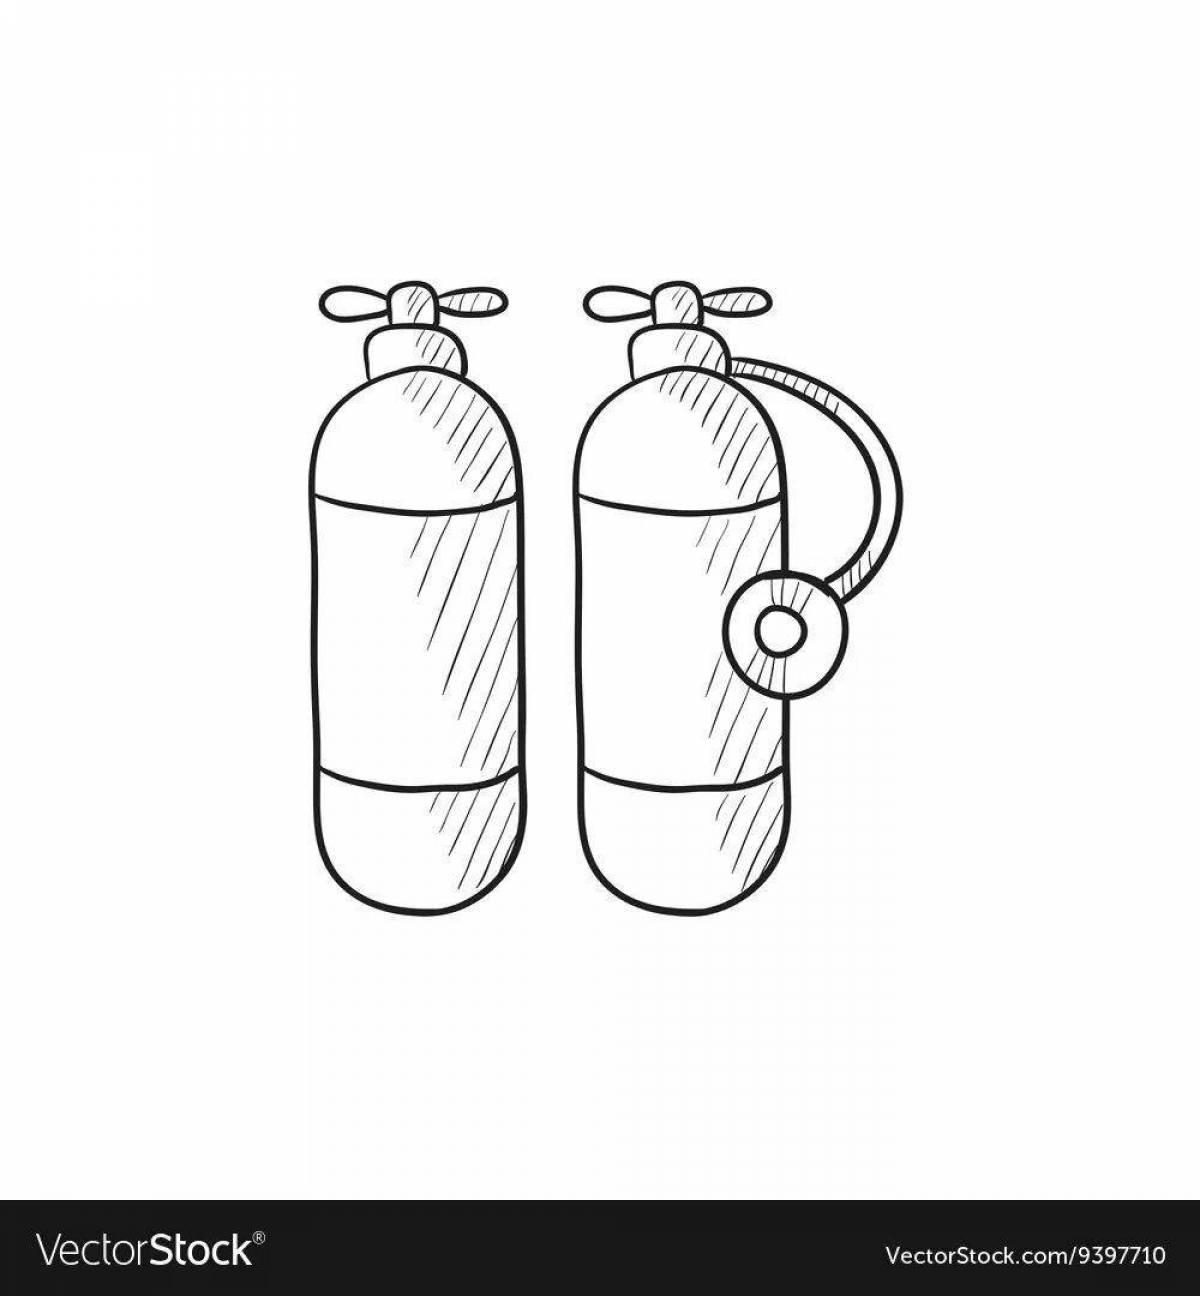 Exciting coloring of gas bottles